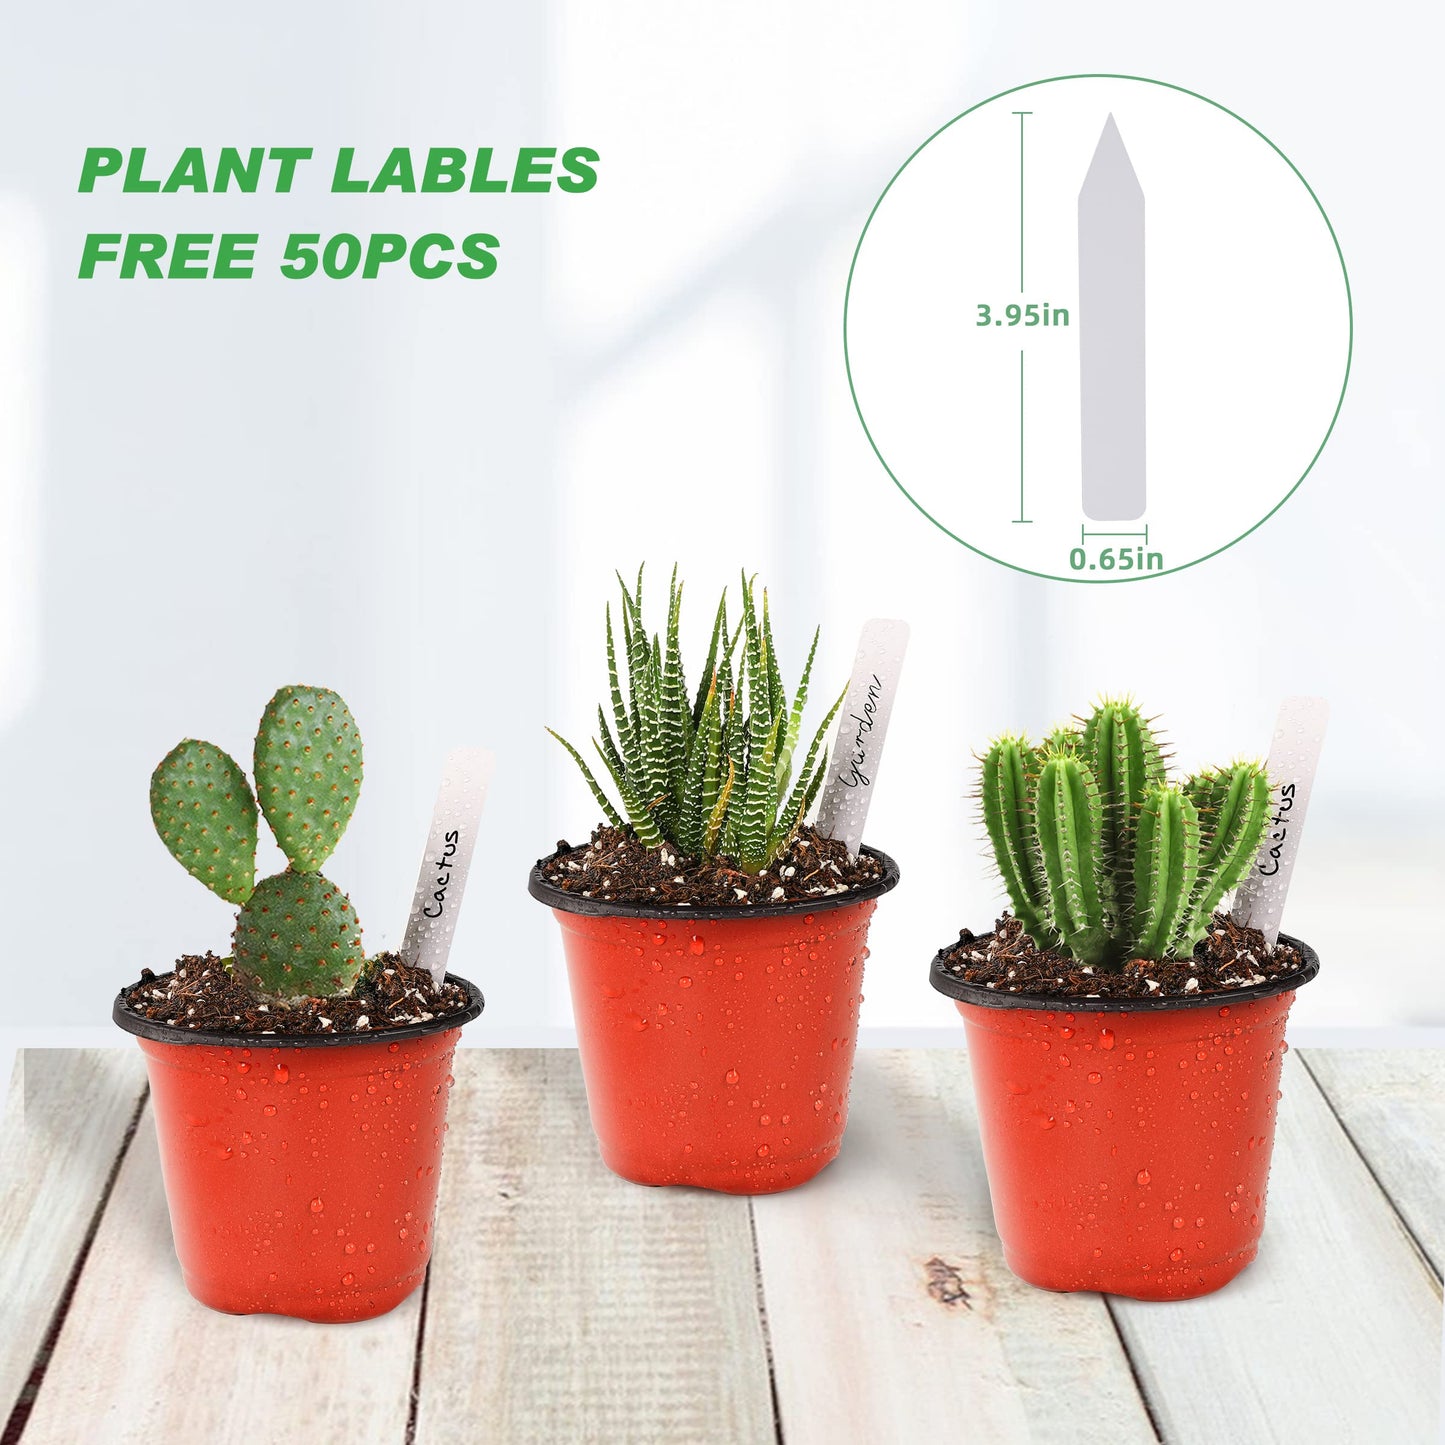 TDHDIKE Plastic Planter Nursery Pots 4" Small (50pcs Pots and 50pcs Labels) Seedlings Flower Pots Container Seed Starting Pots for Plants